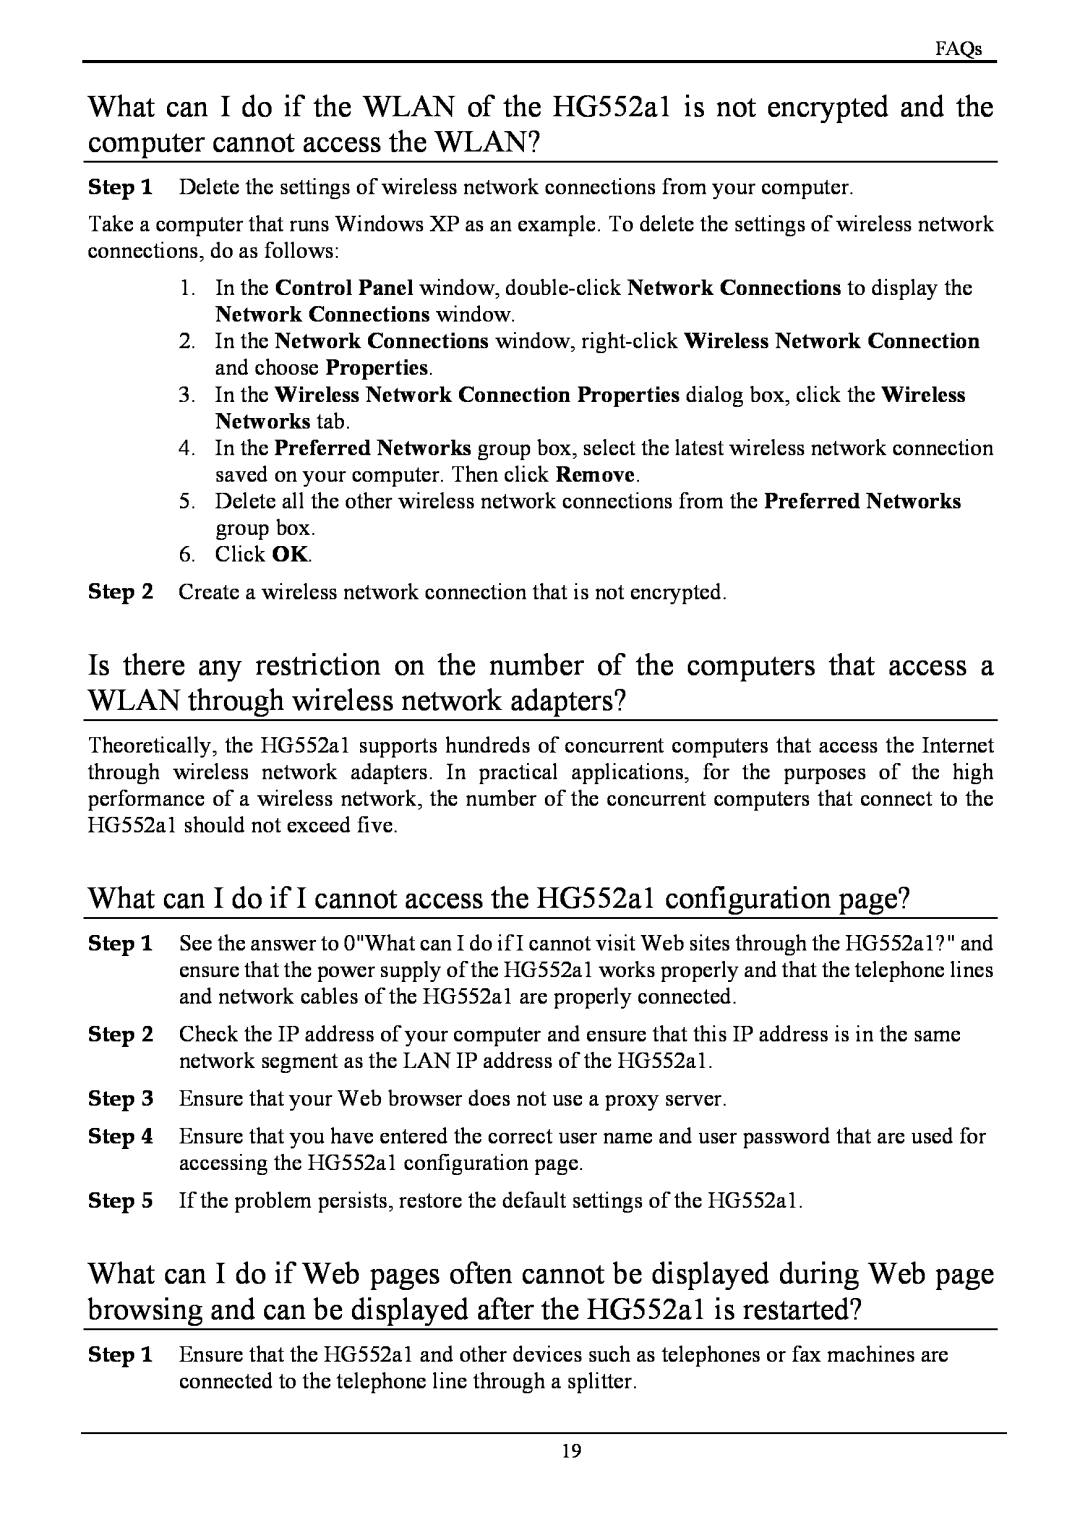 Huawei manual What can I do if I cannot access the HG552a1 configuration page? 